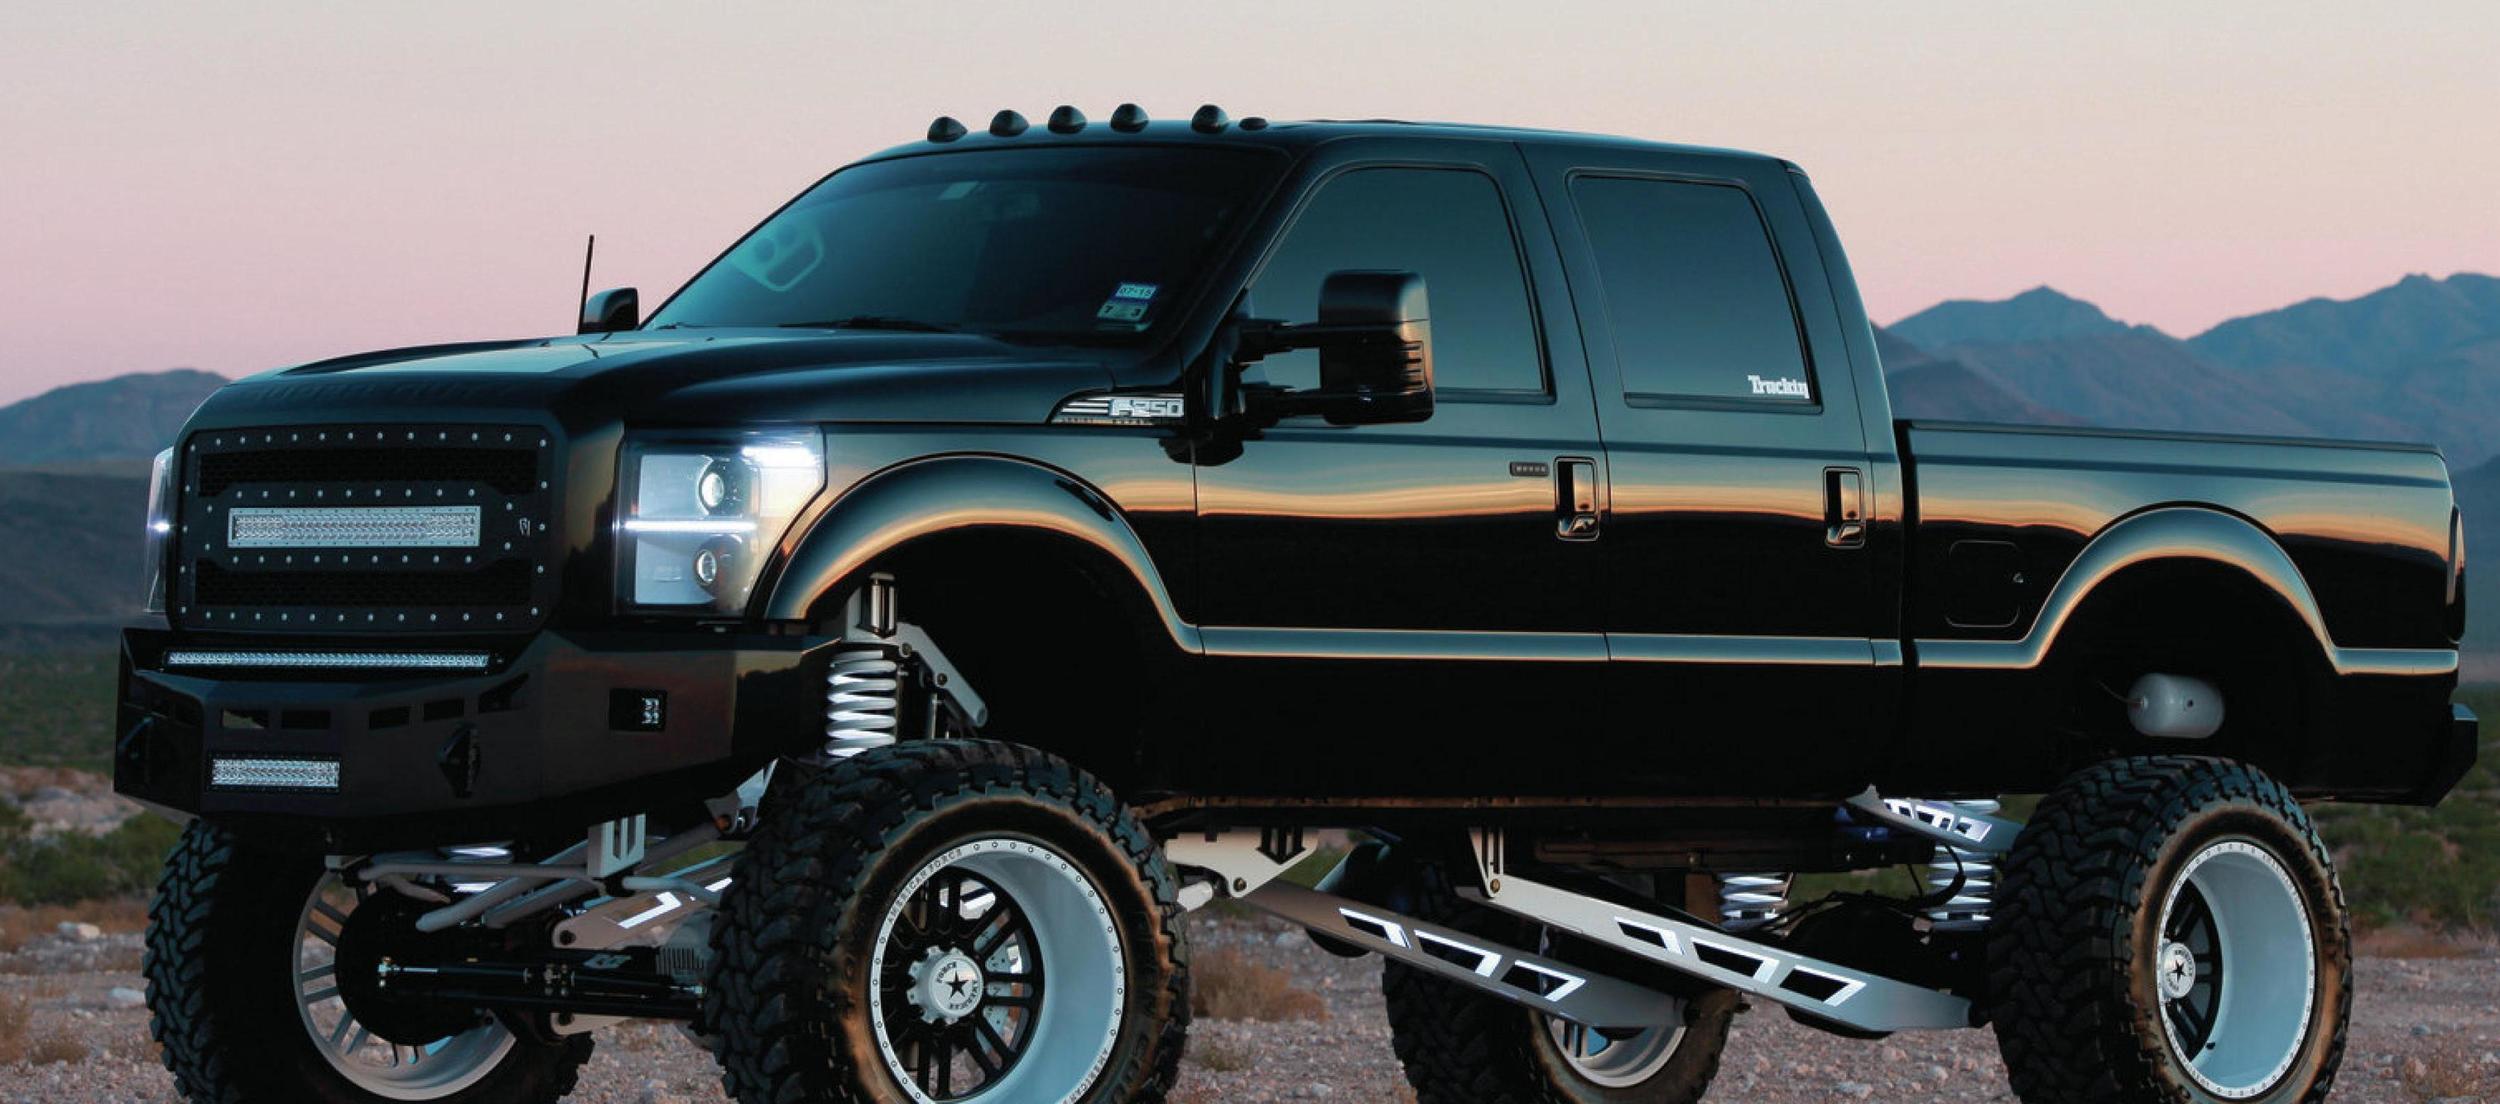 Lifted Truck Wallpapers Iphone Wallpaper Gallery